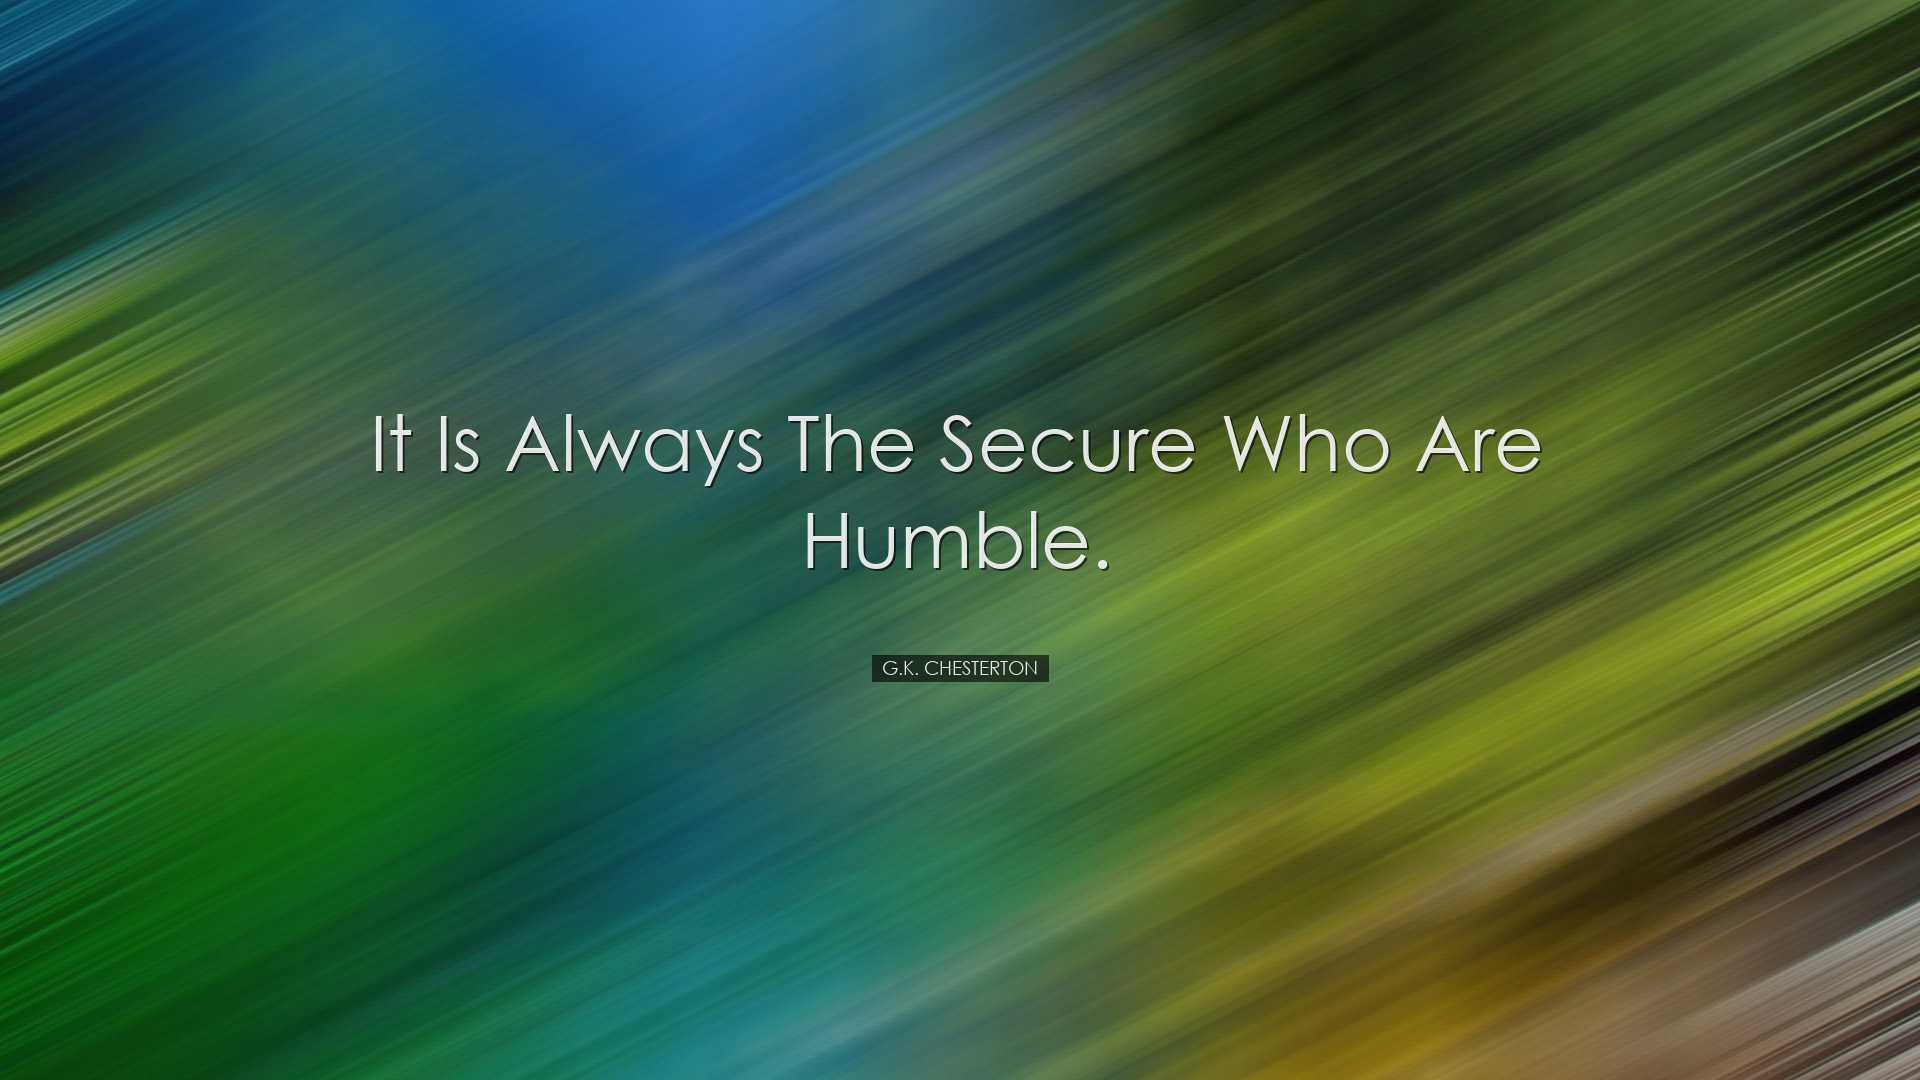 It is always the secure who are humble. - G.K. Chesterton